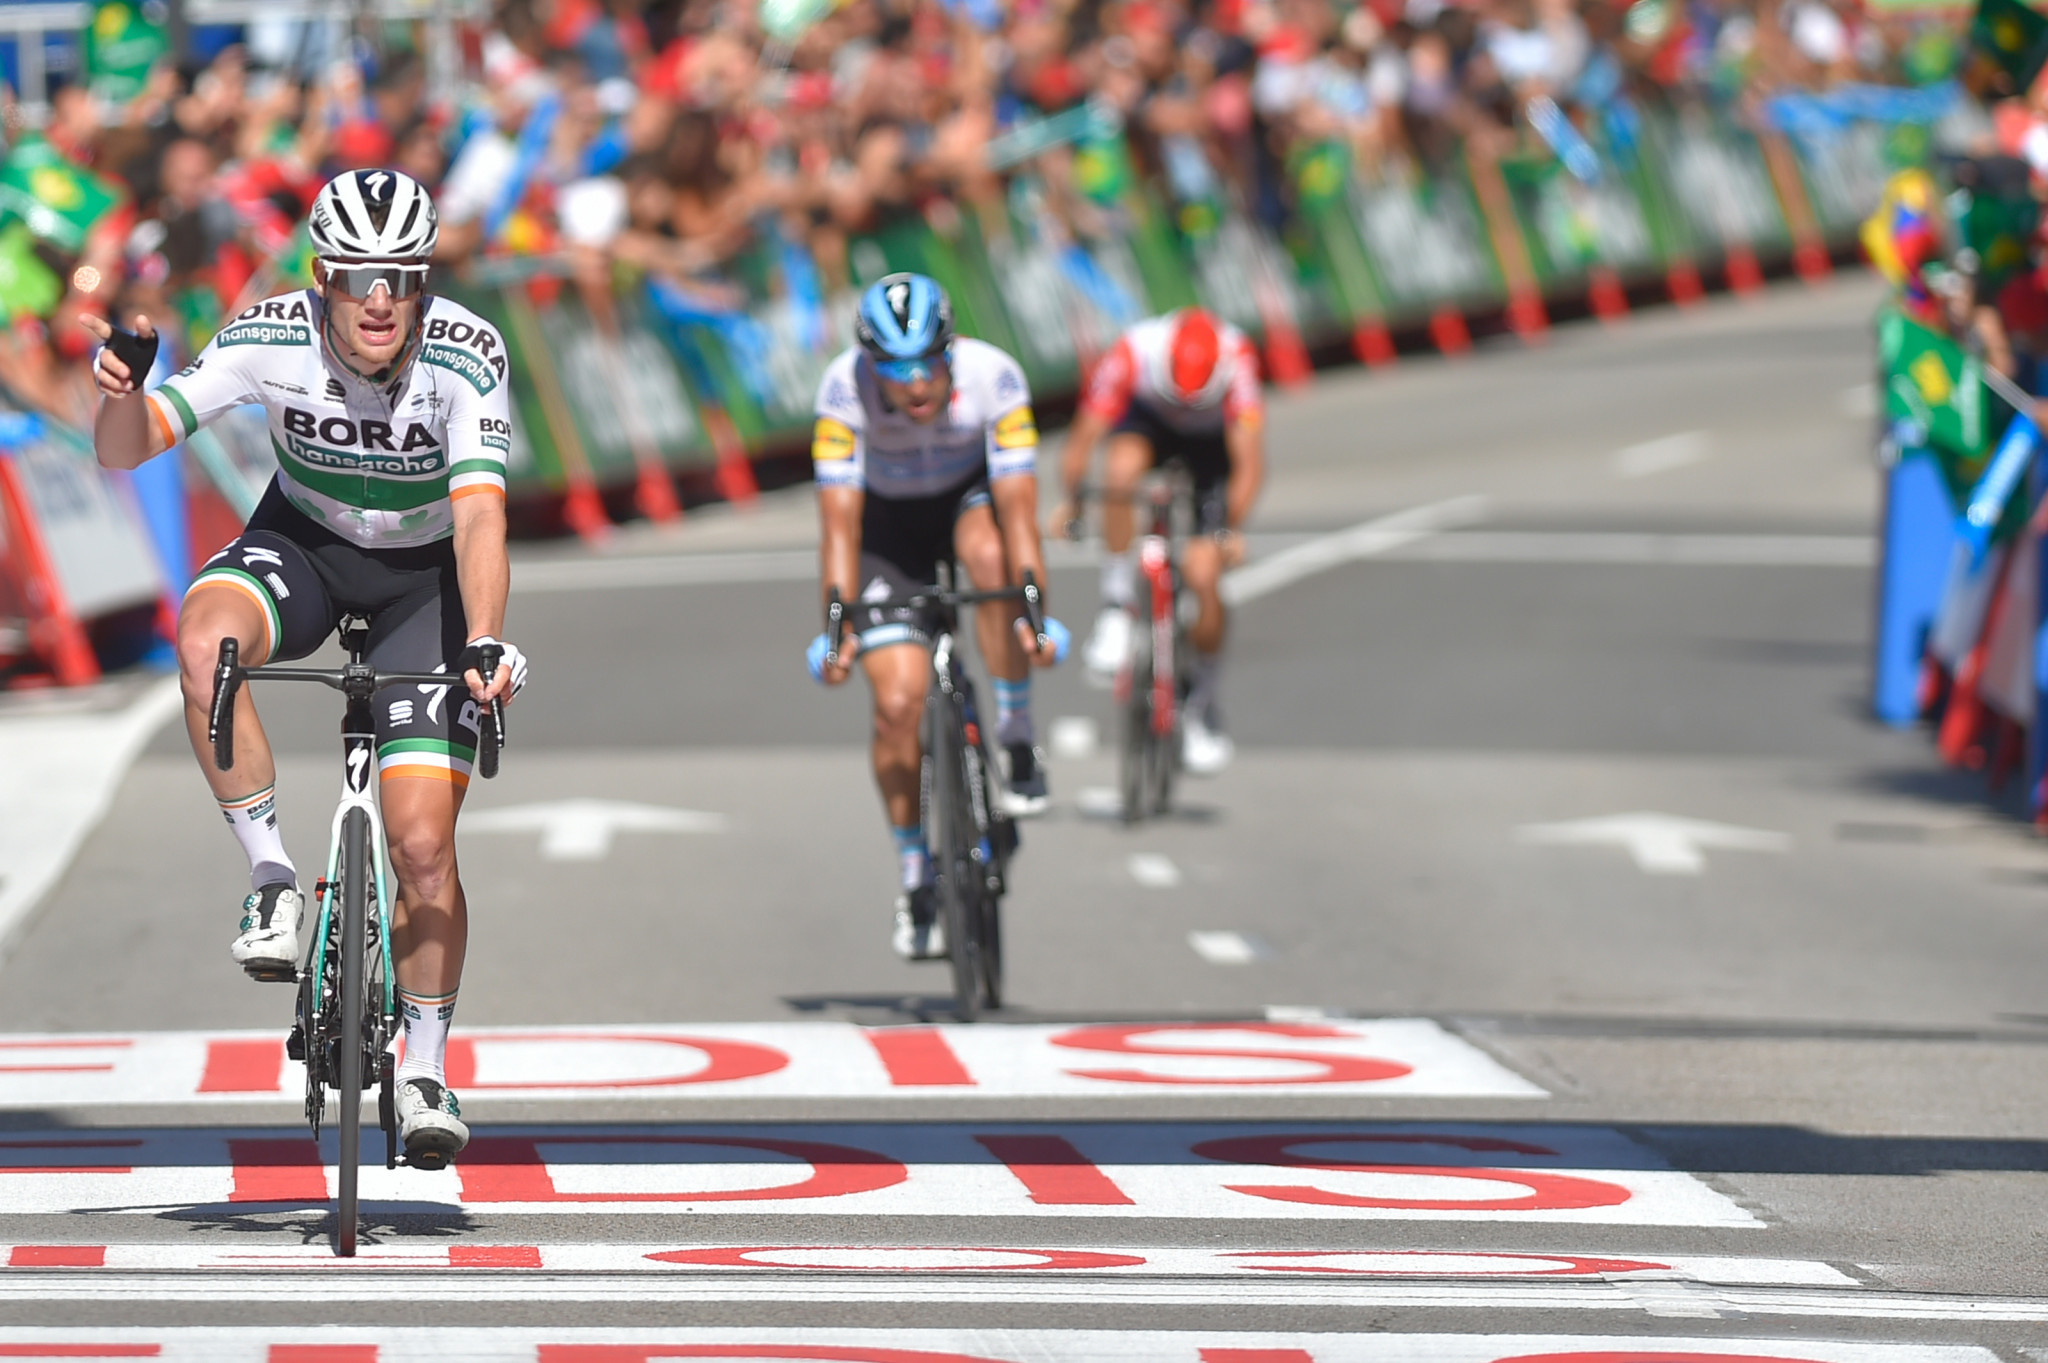 Bennett wins stage 14 after crash impacts finish at Vuelta a España